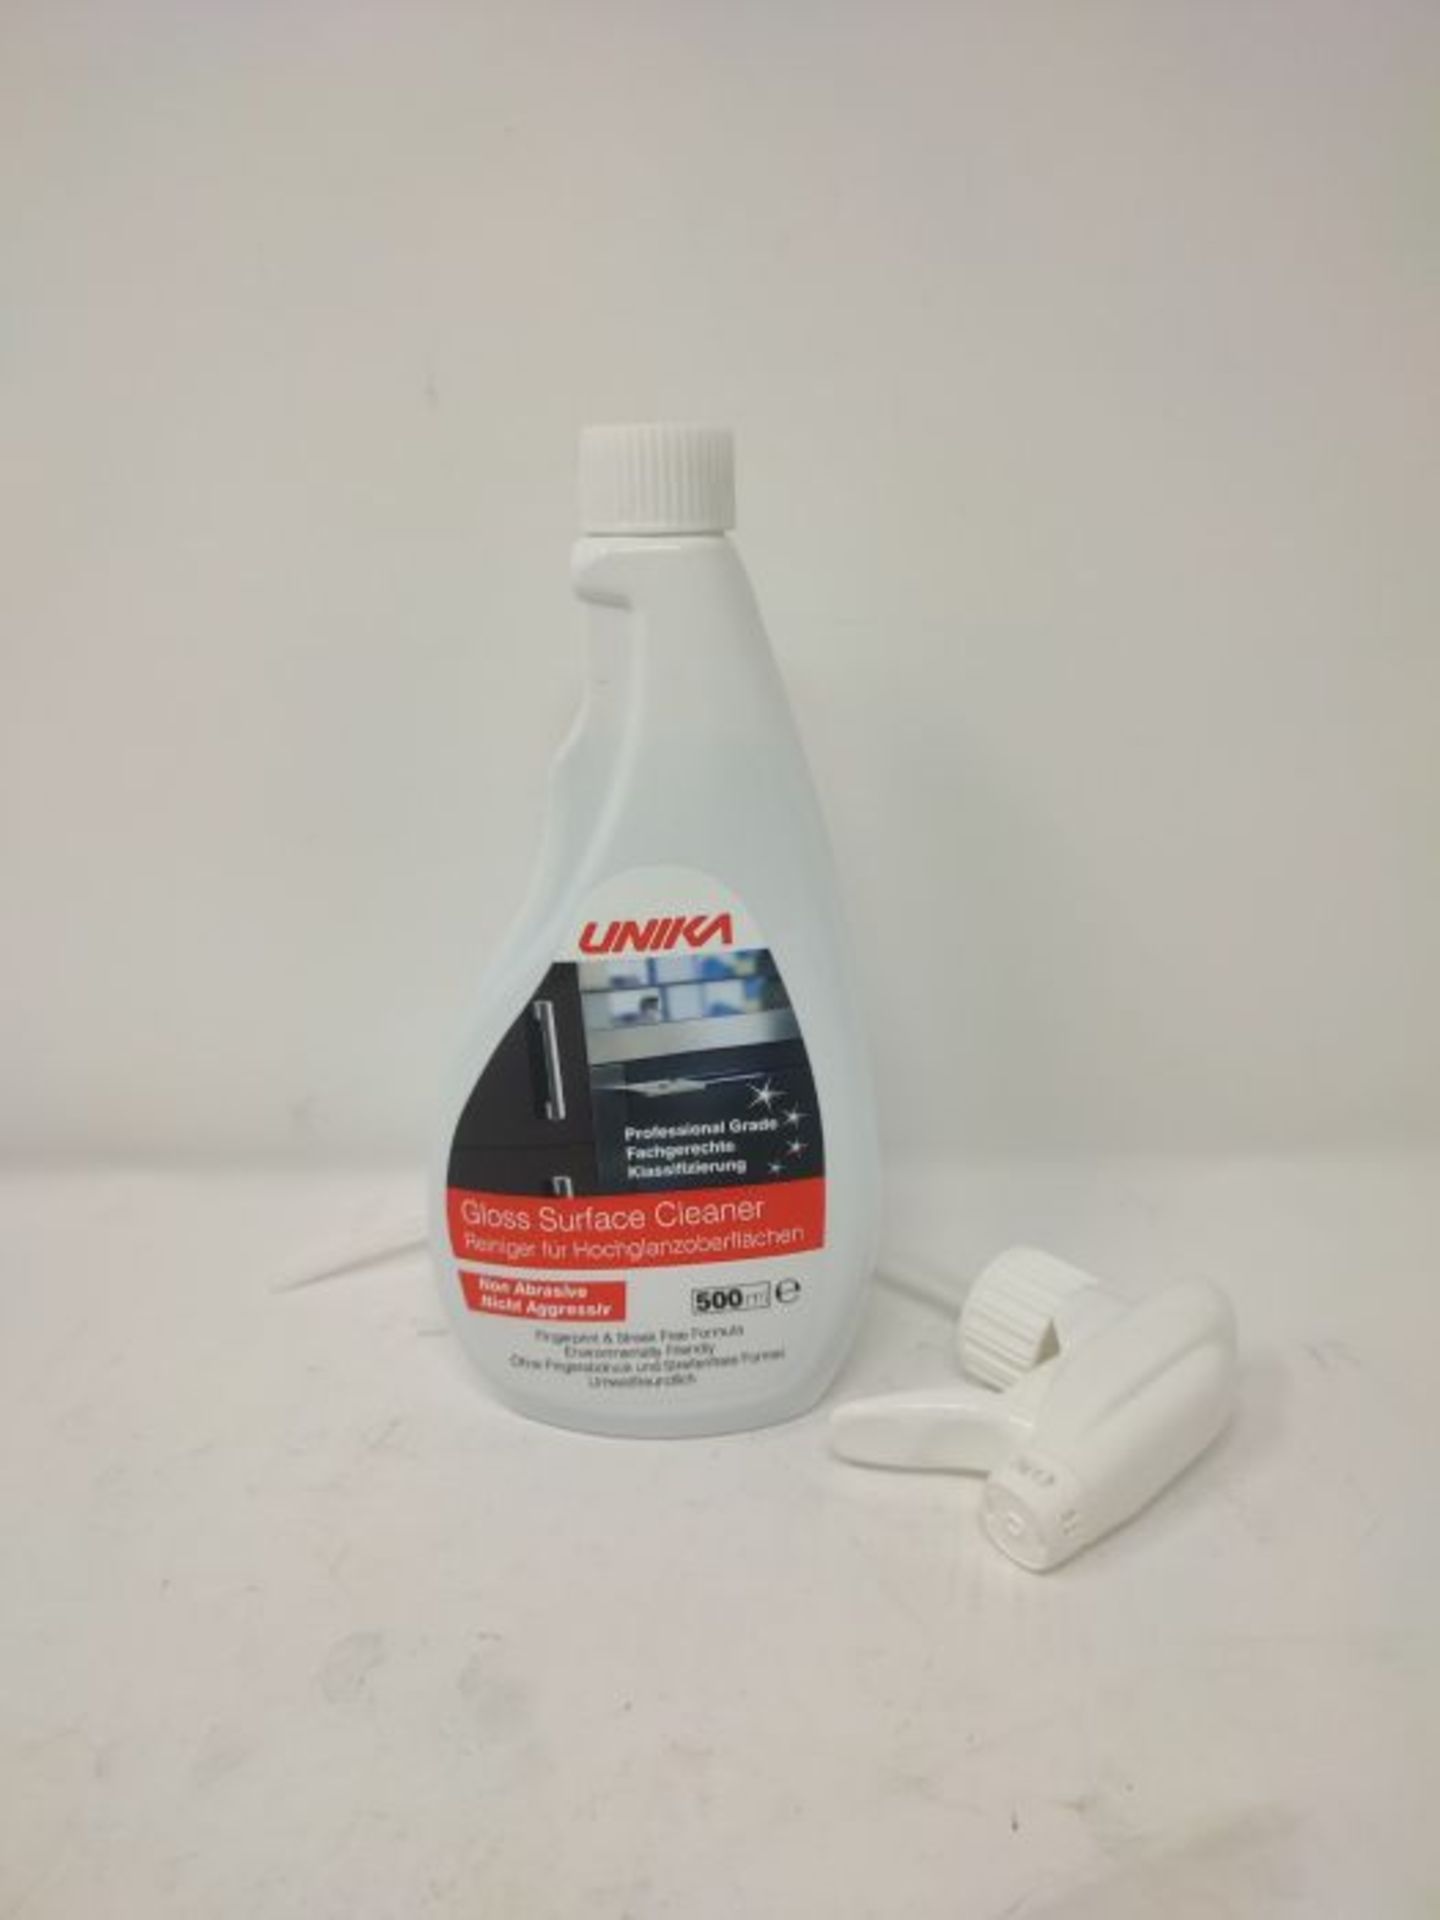 Unika CLEANGLOSSP500 Non-Aerosol Gloss Surface Cleaner & Microfibre Cloth 500ml - Image 2 of 2